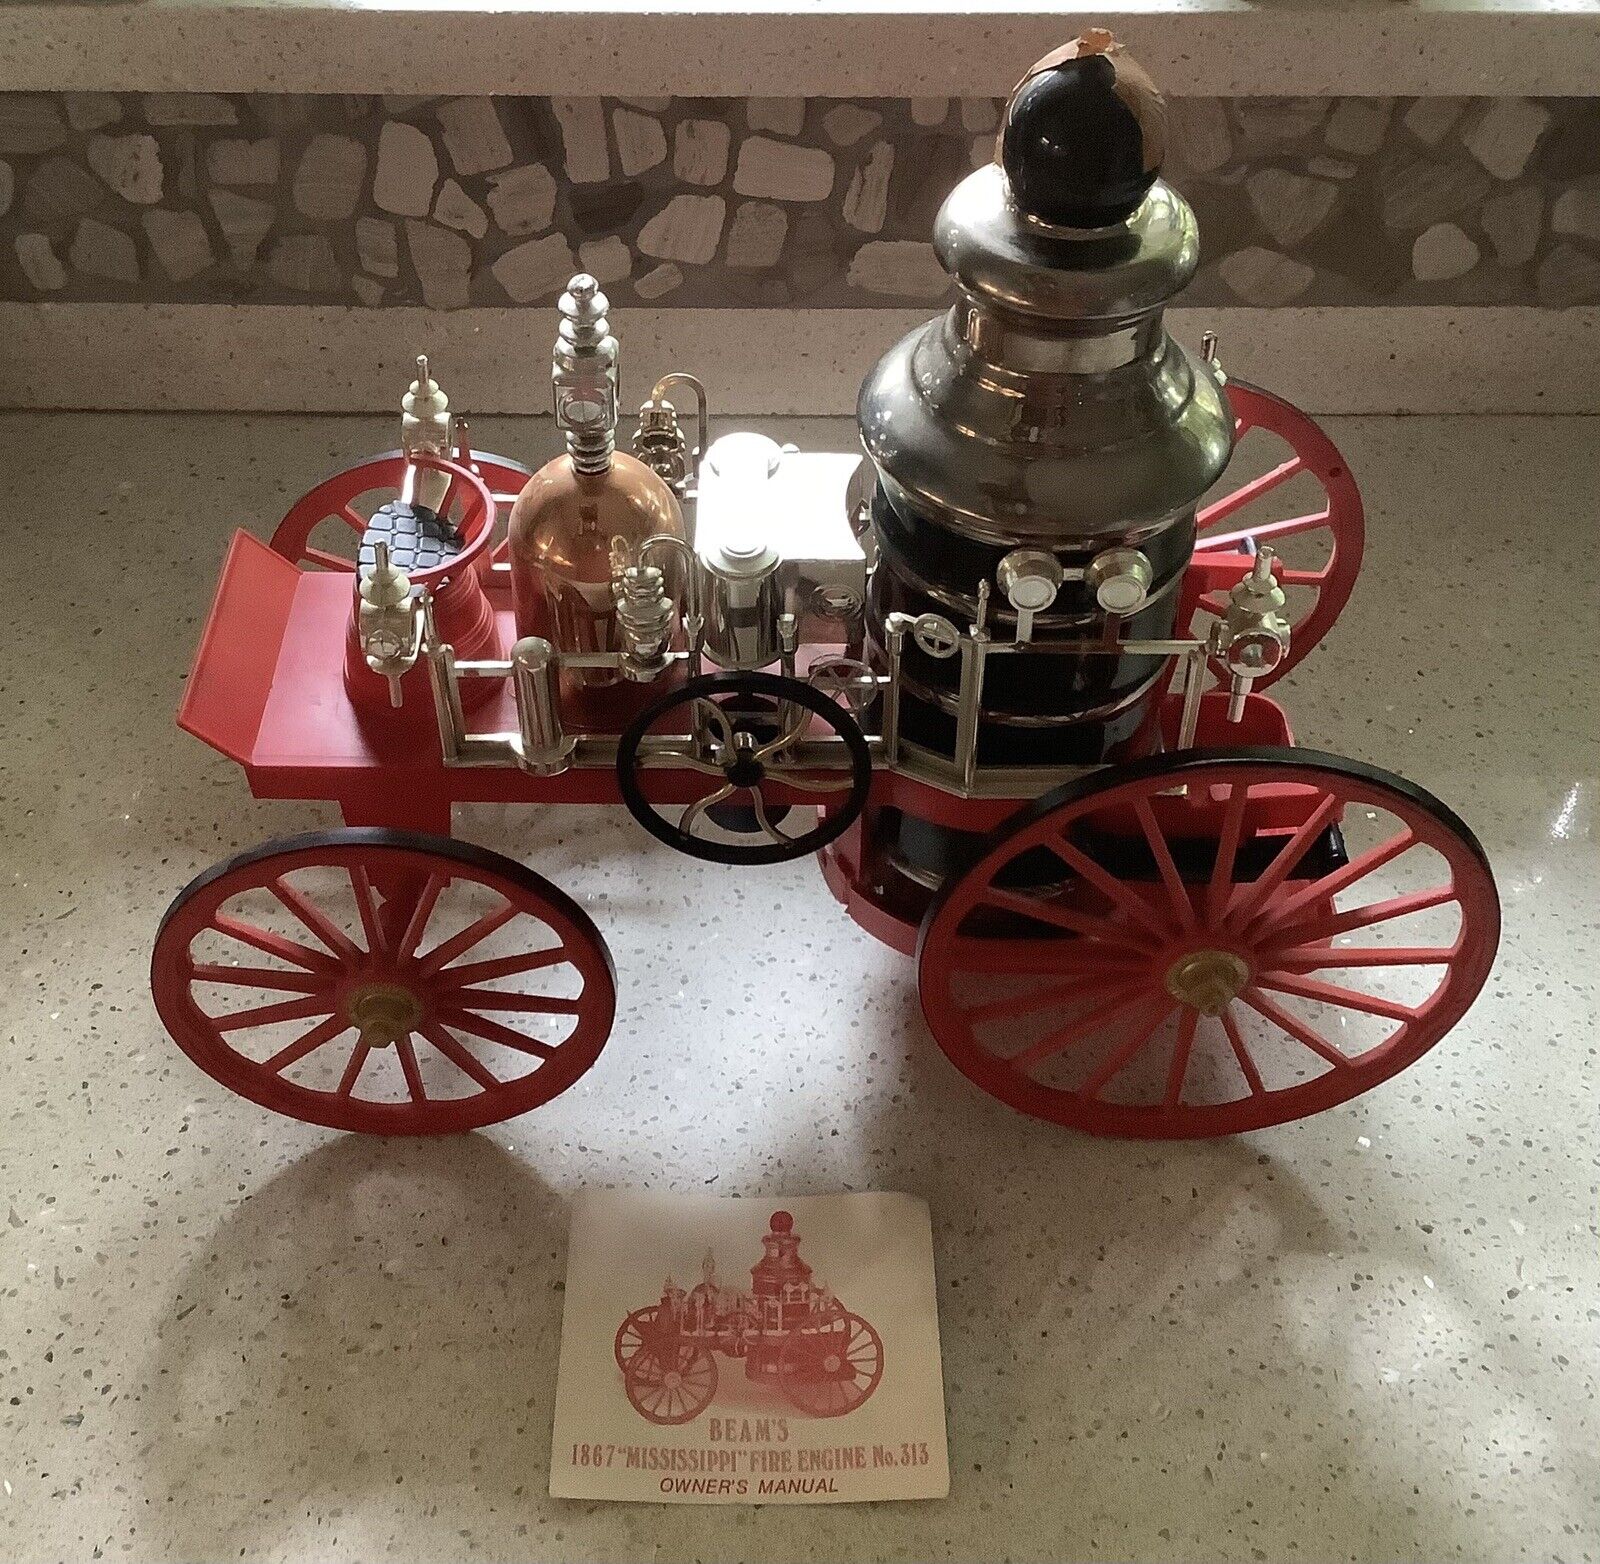 Jim Beam Collectable 1867 “Mississippi” Fire Engine No. 313